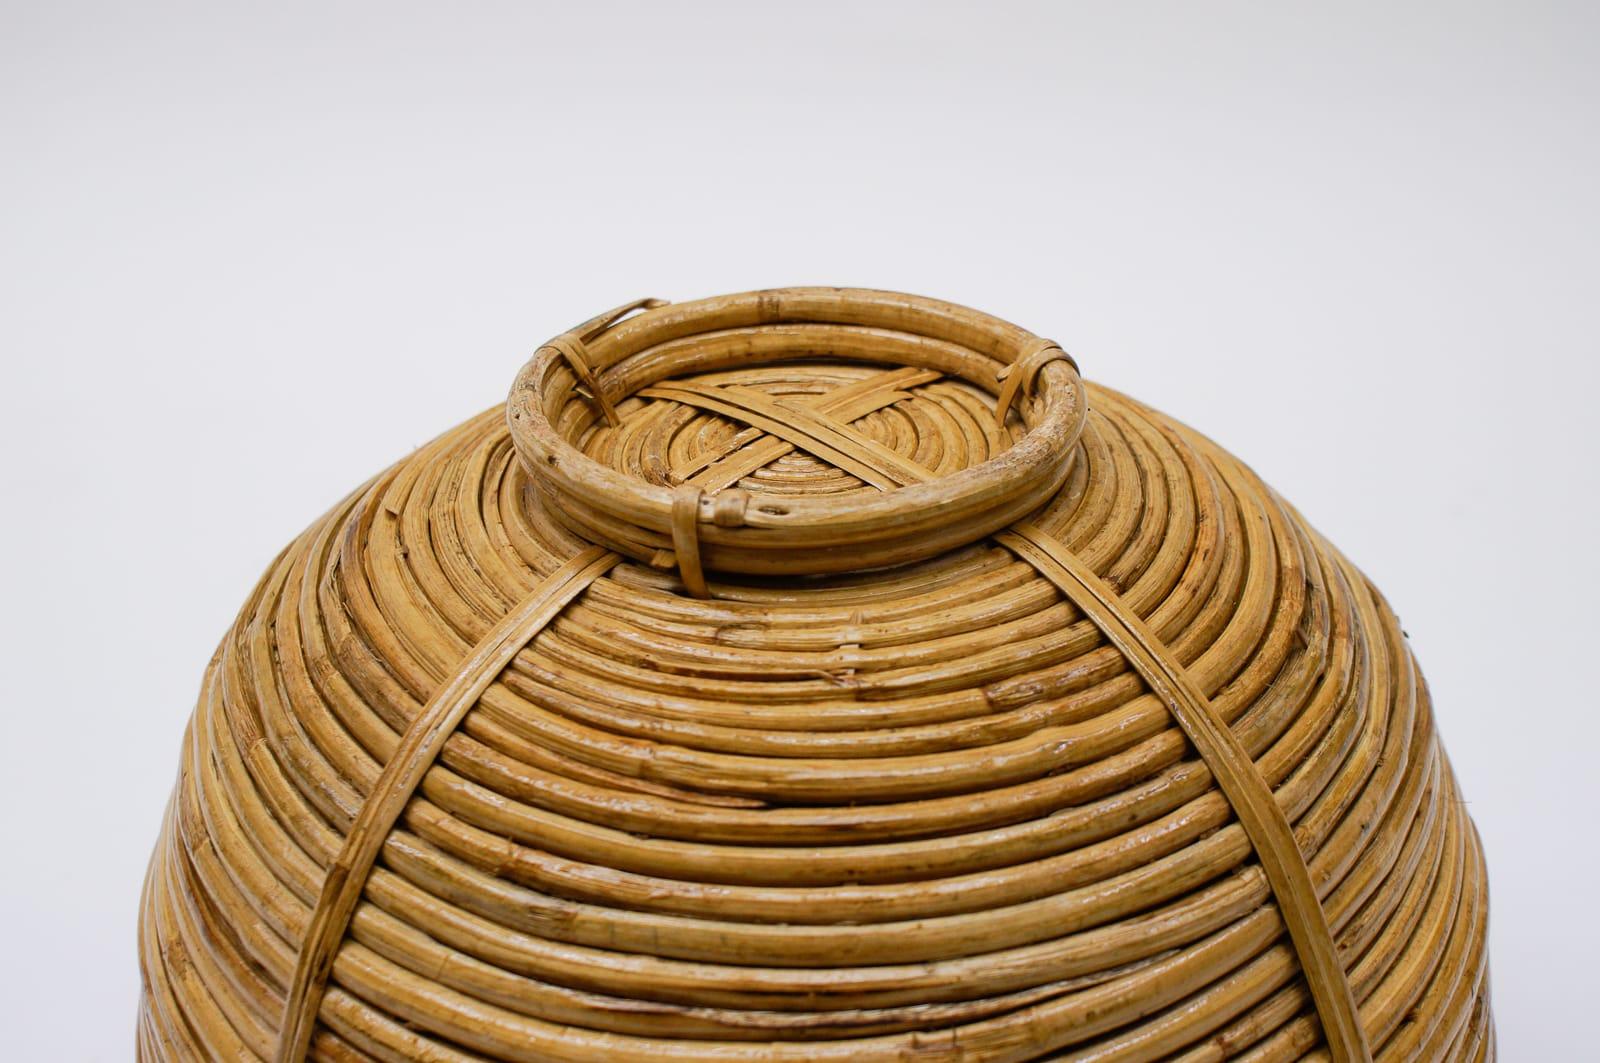 Large Rattan and Brass Midcentury Handcrafted Bowl, Austria, 1950s For Sale 7